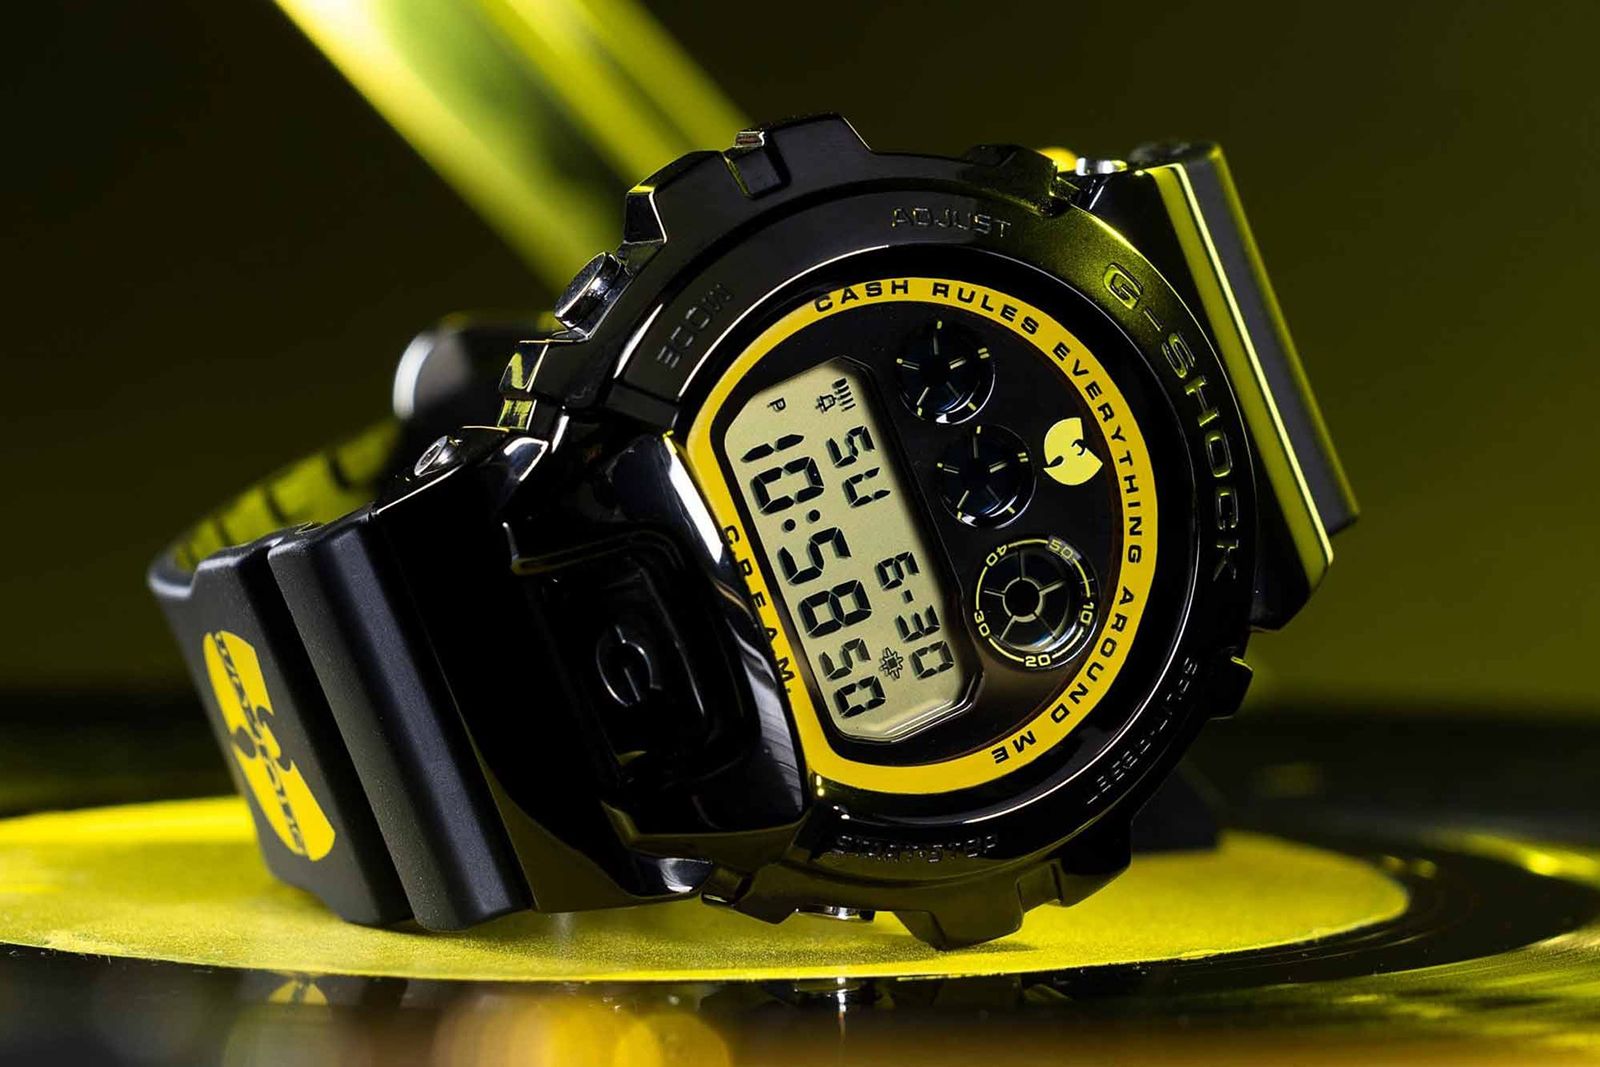 Wu-Tang Clan G-Shock is very limited and really cool